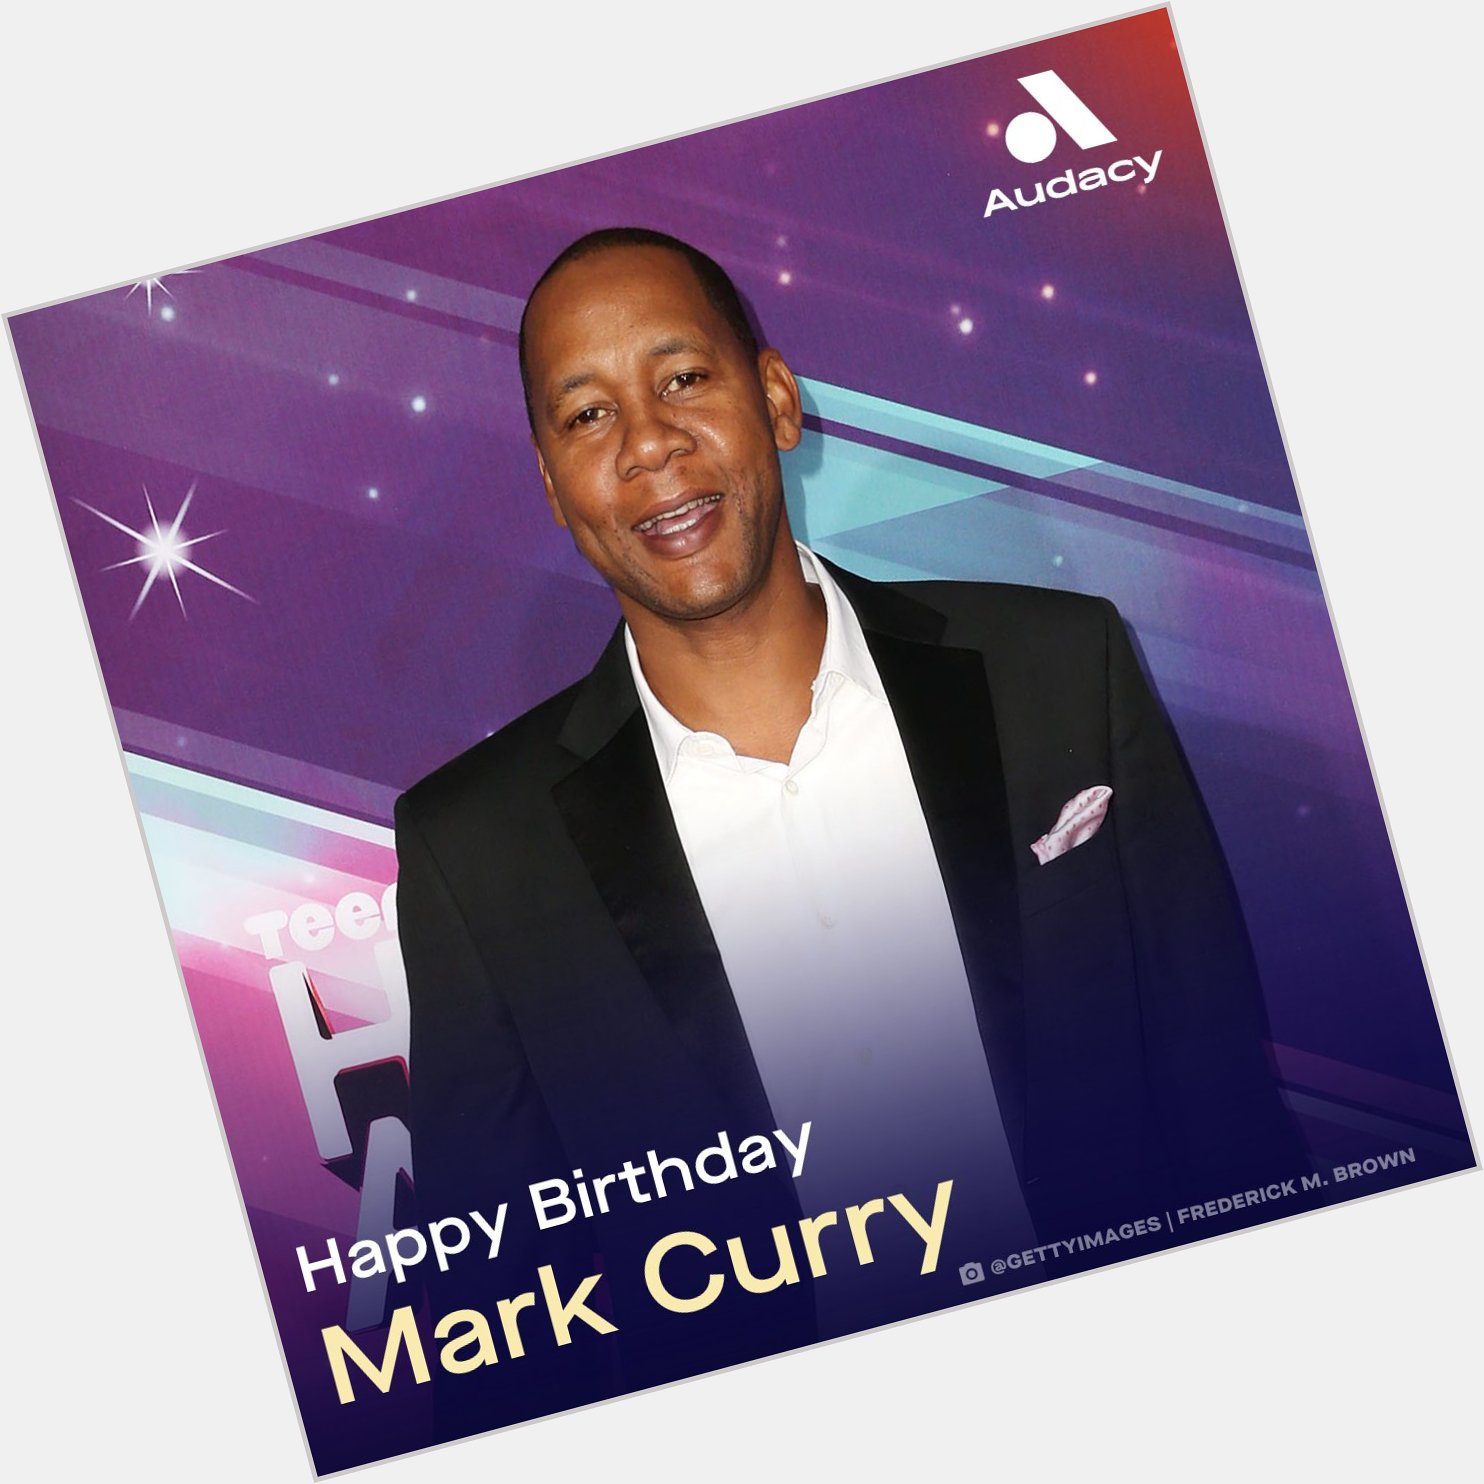 Coo-oo-oo-oo-oooper! Happy birthday to Mark Curry! Did you used to watch \Hangin with Mr. Cooper\? 